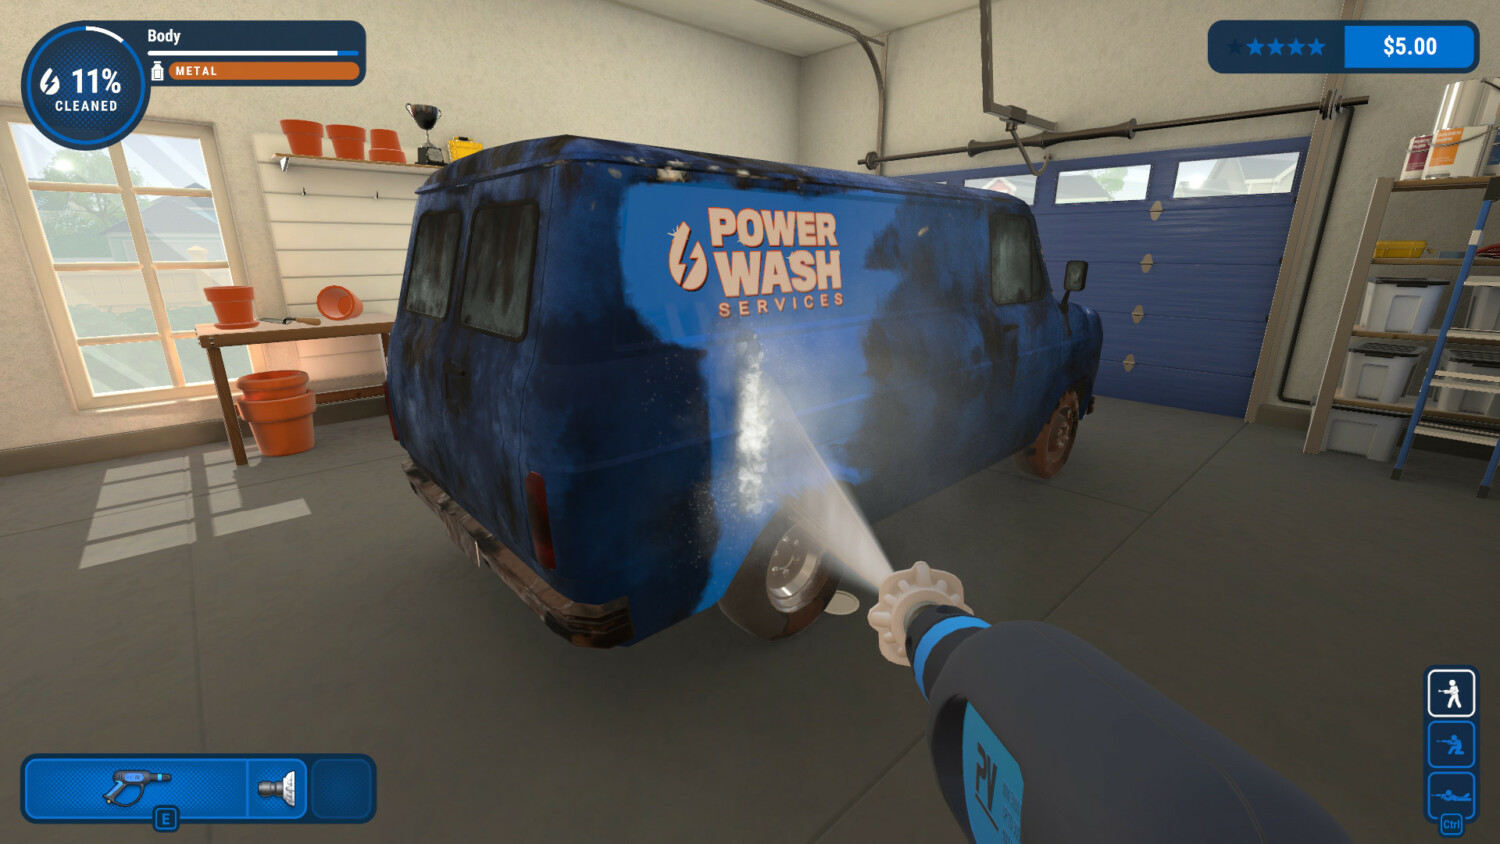 I am so stoked that PowerWash Simulator is available on the Switch and